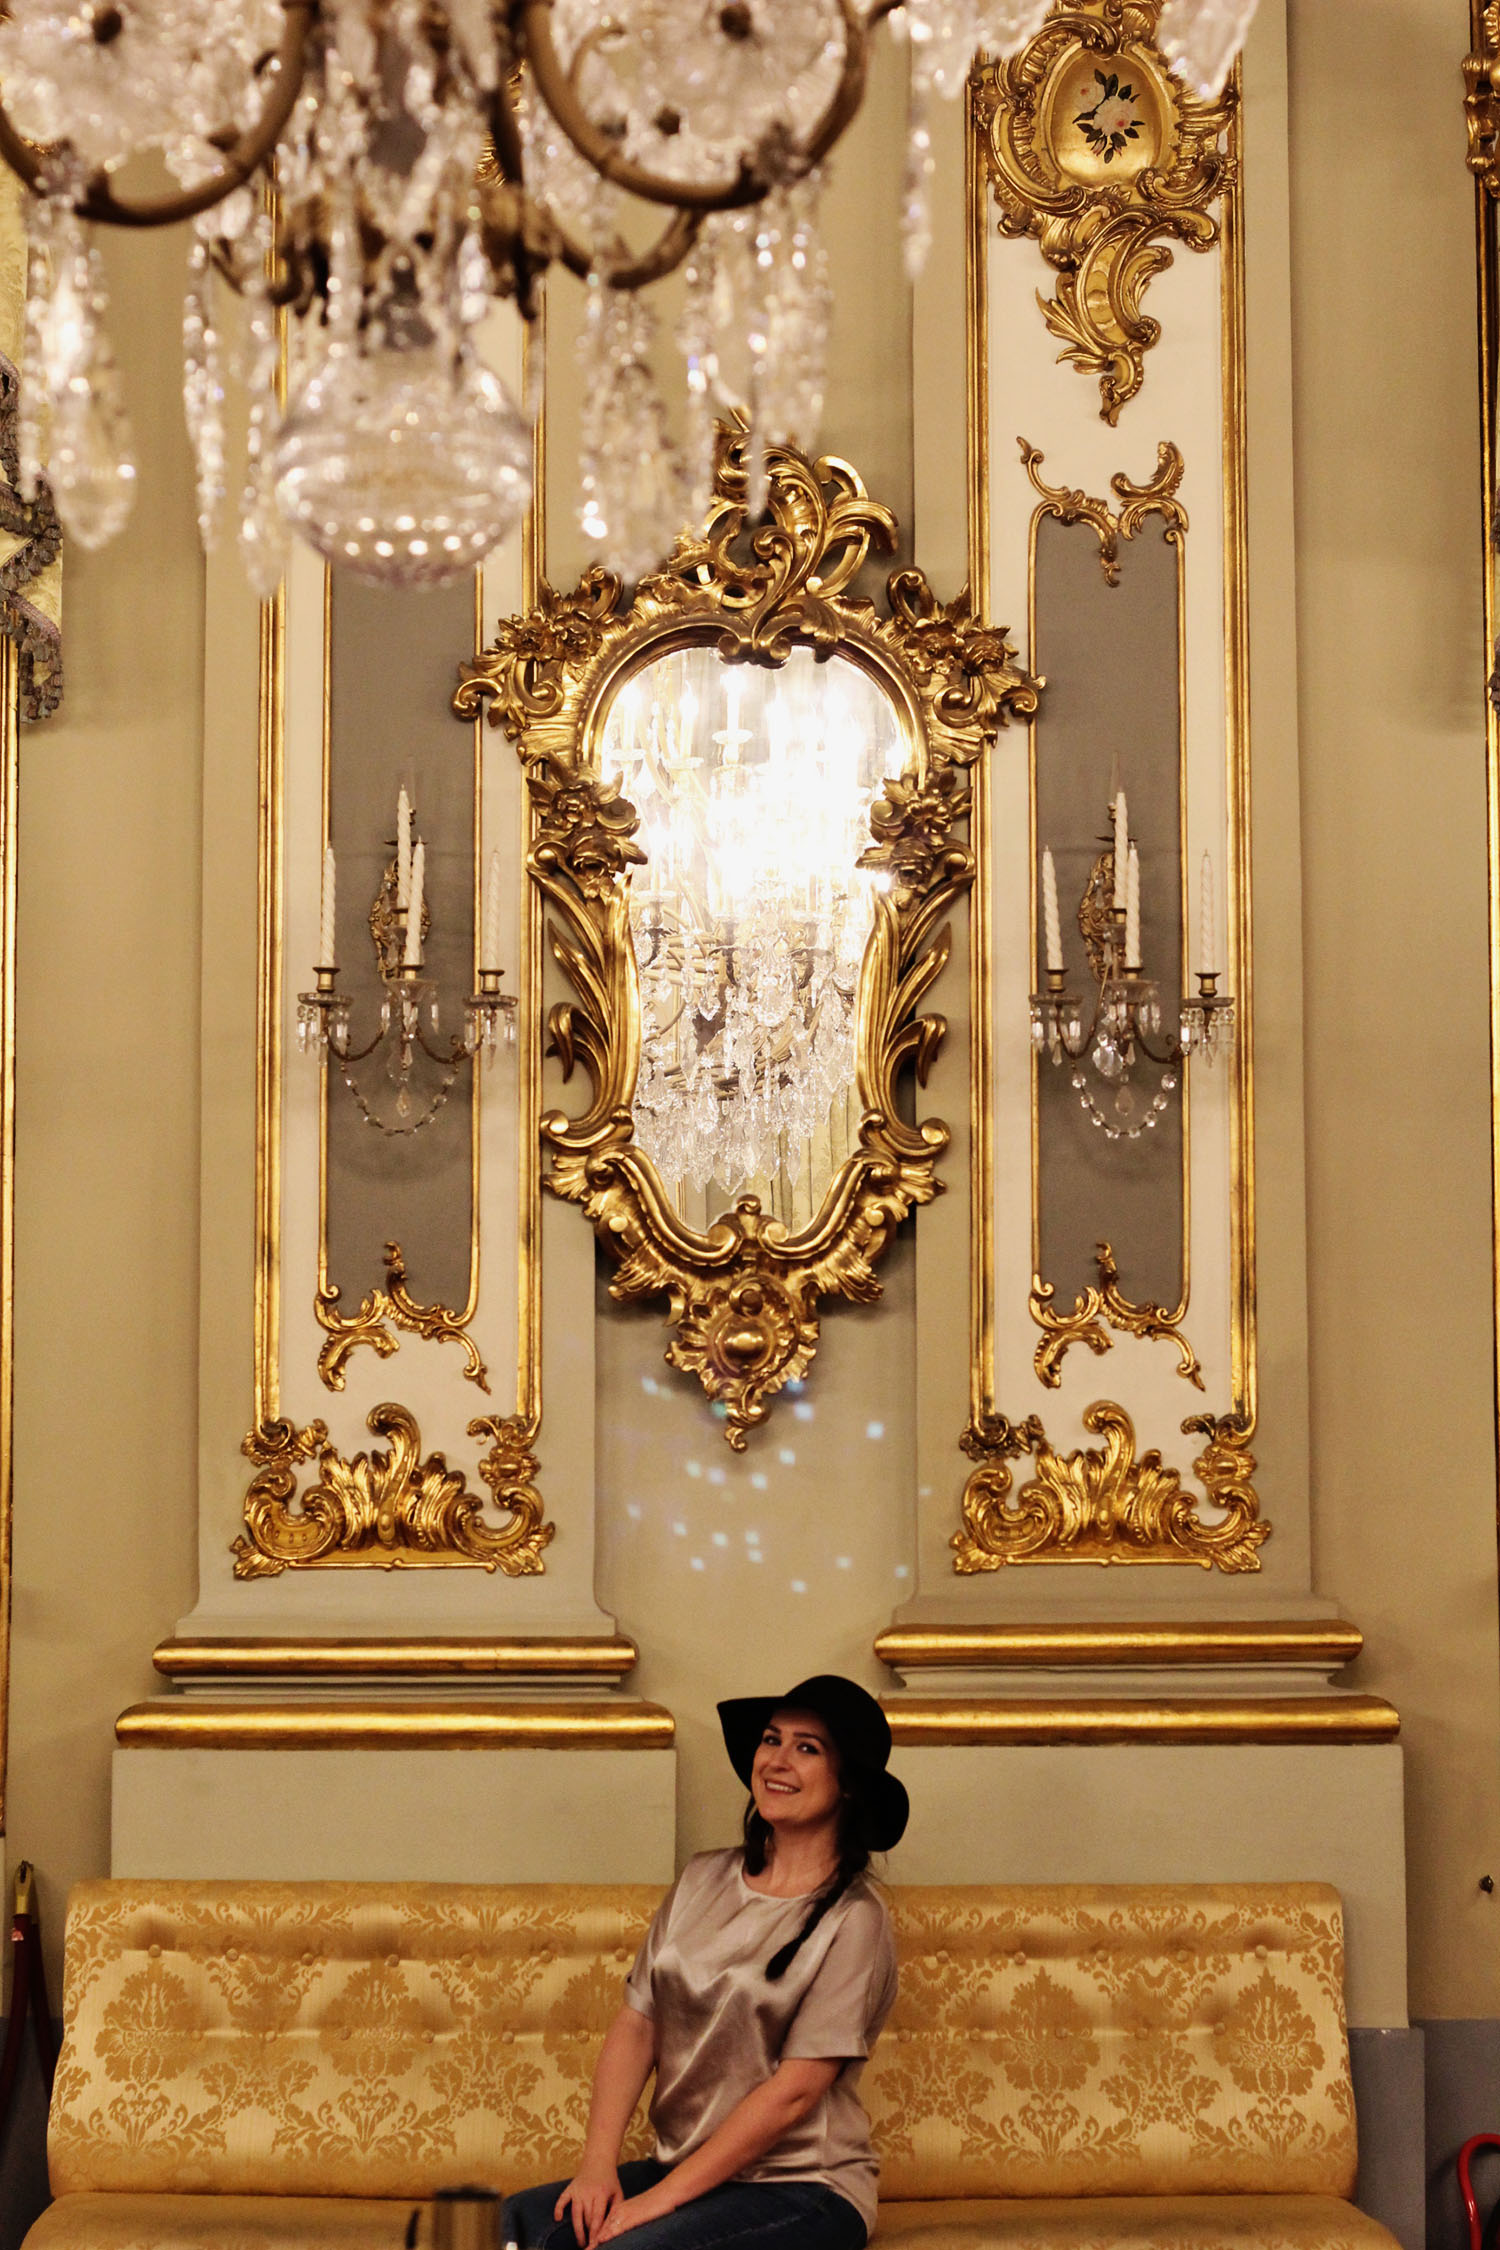 woman wears black floppy hat sitting on an ornate sofa in an ornate gold room